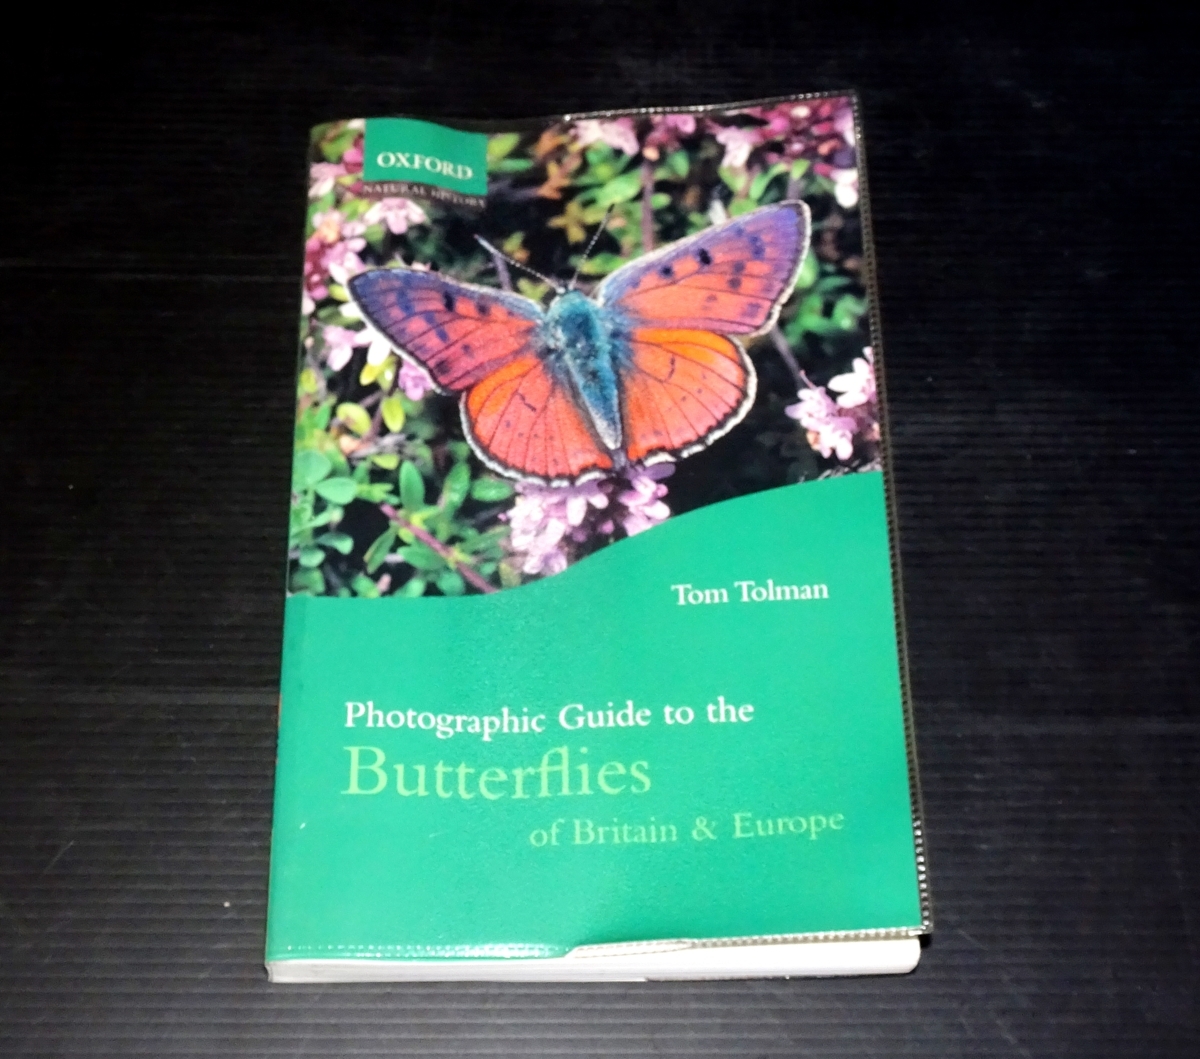 [Photographic Guide to the Butterflies of Britain & Europe] Tom Tolman